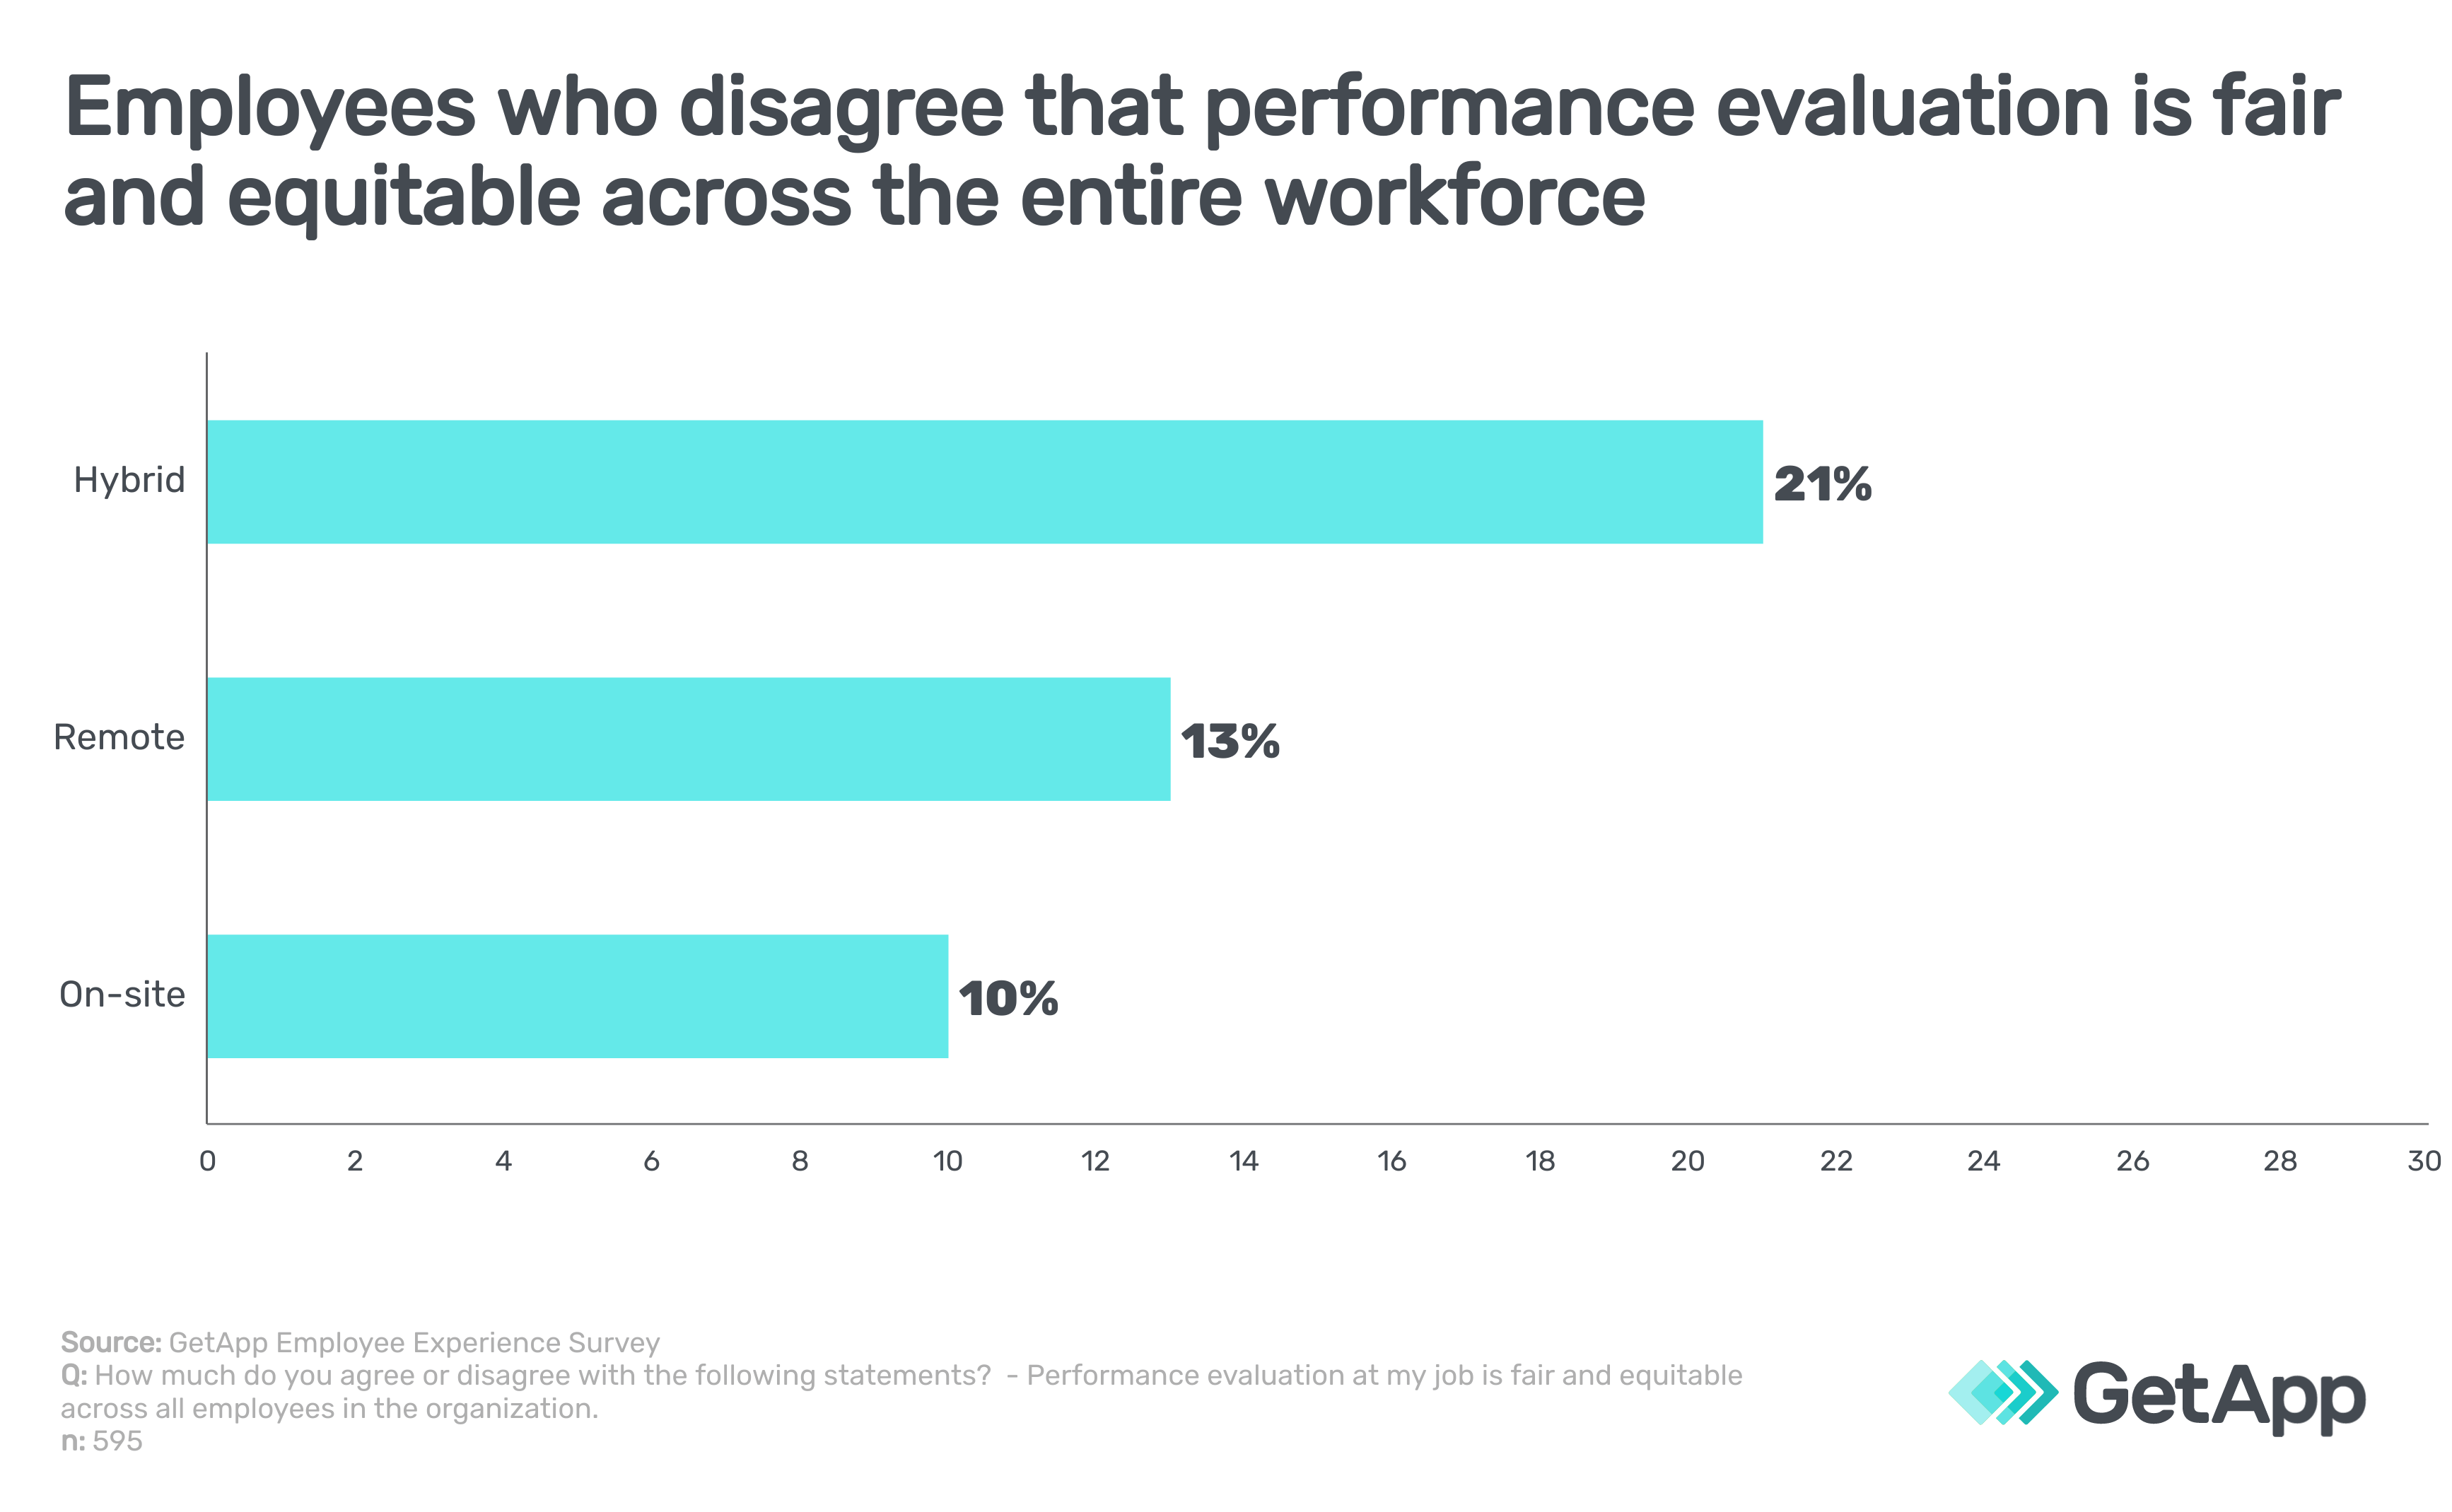 hybrid-employees-more-likely-to-disagree-that-performance-evaluation-is-fair-equitable